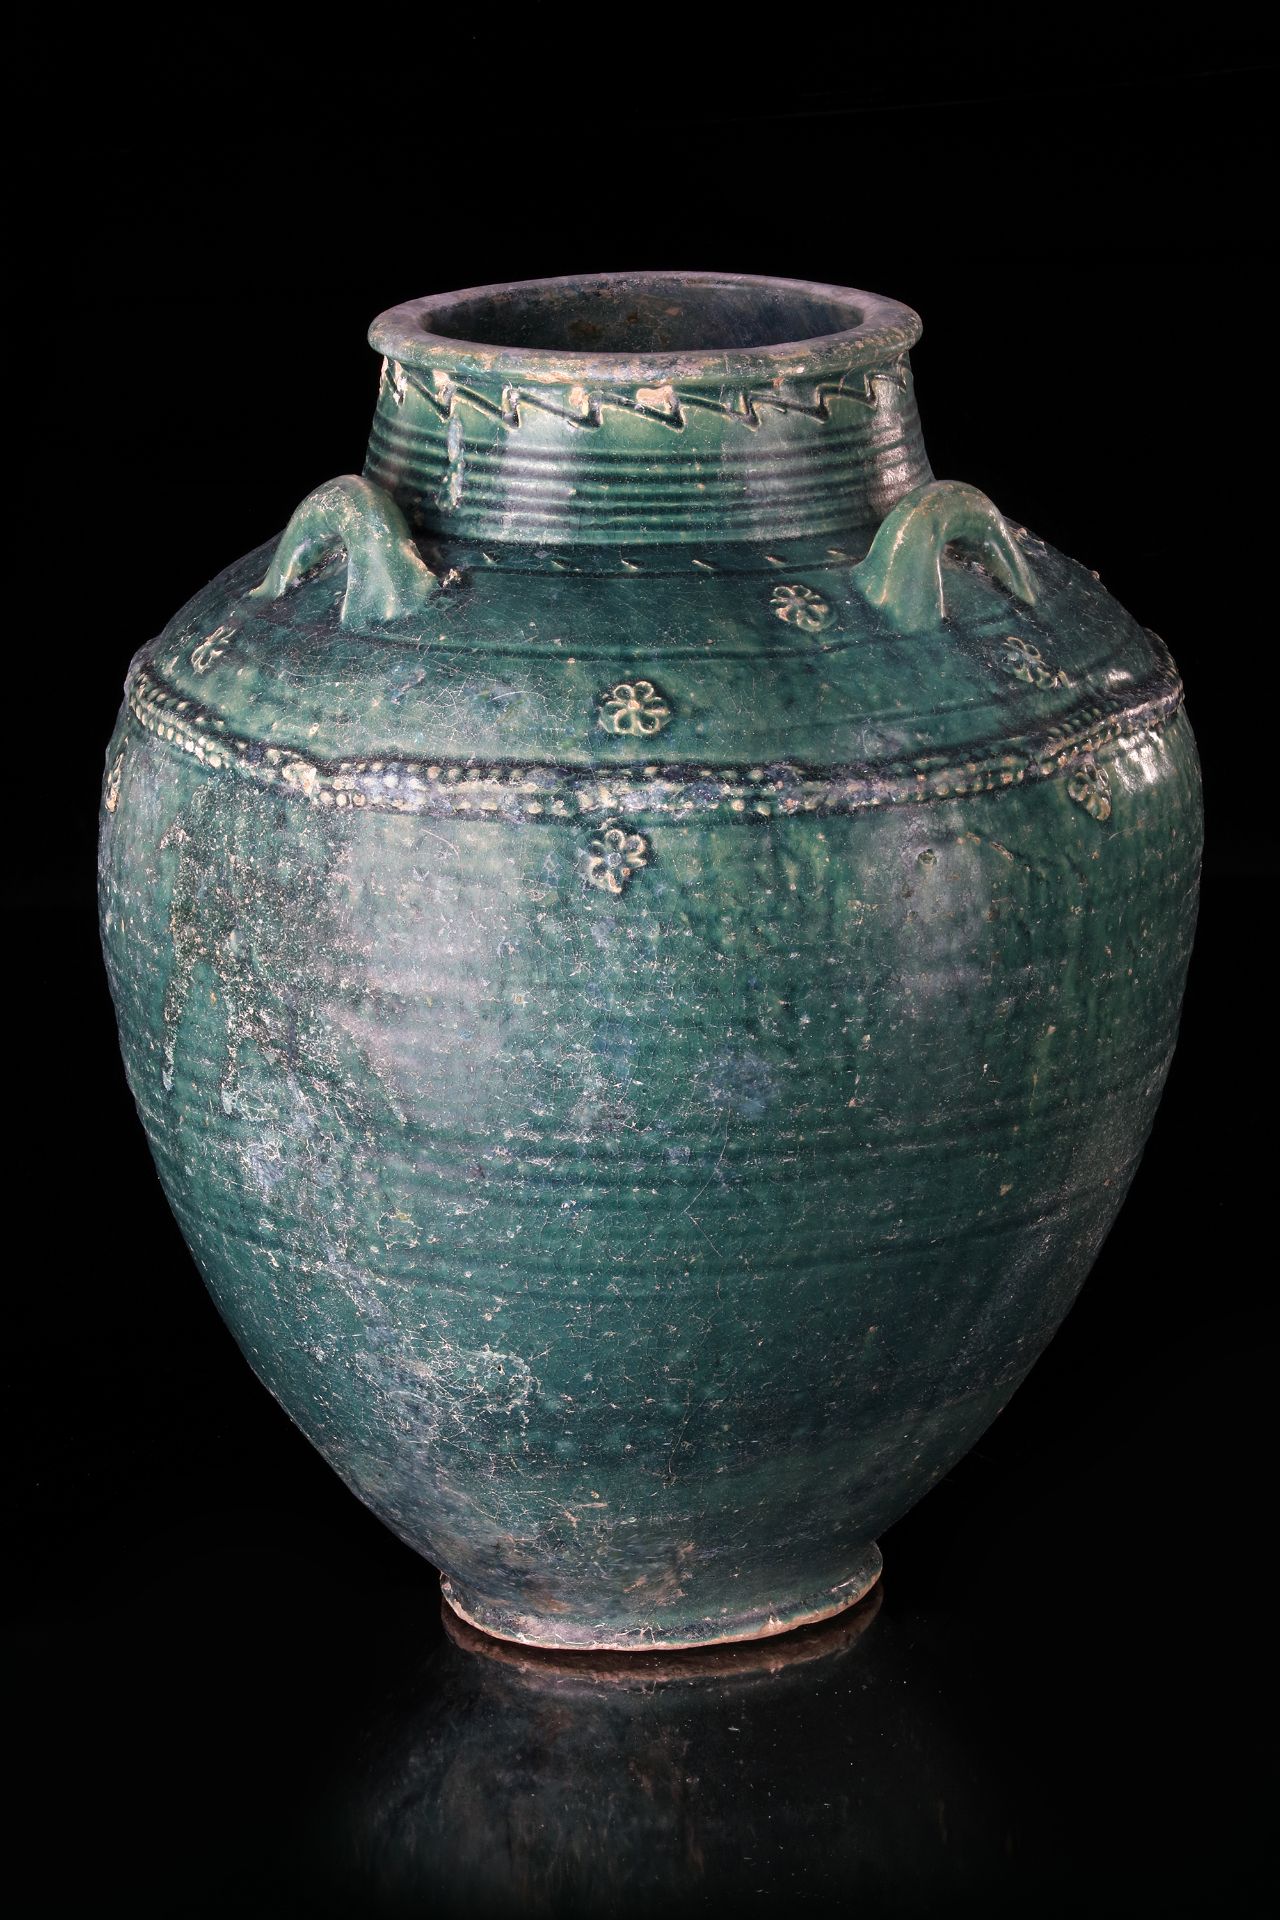 A LARGE POST SASSANIAN TURQUOISE GLAZED POTTERY STORAGE JAR, PERSIA, 6TH-8TH CENTURY - Image 3 of 3